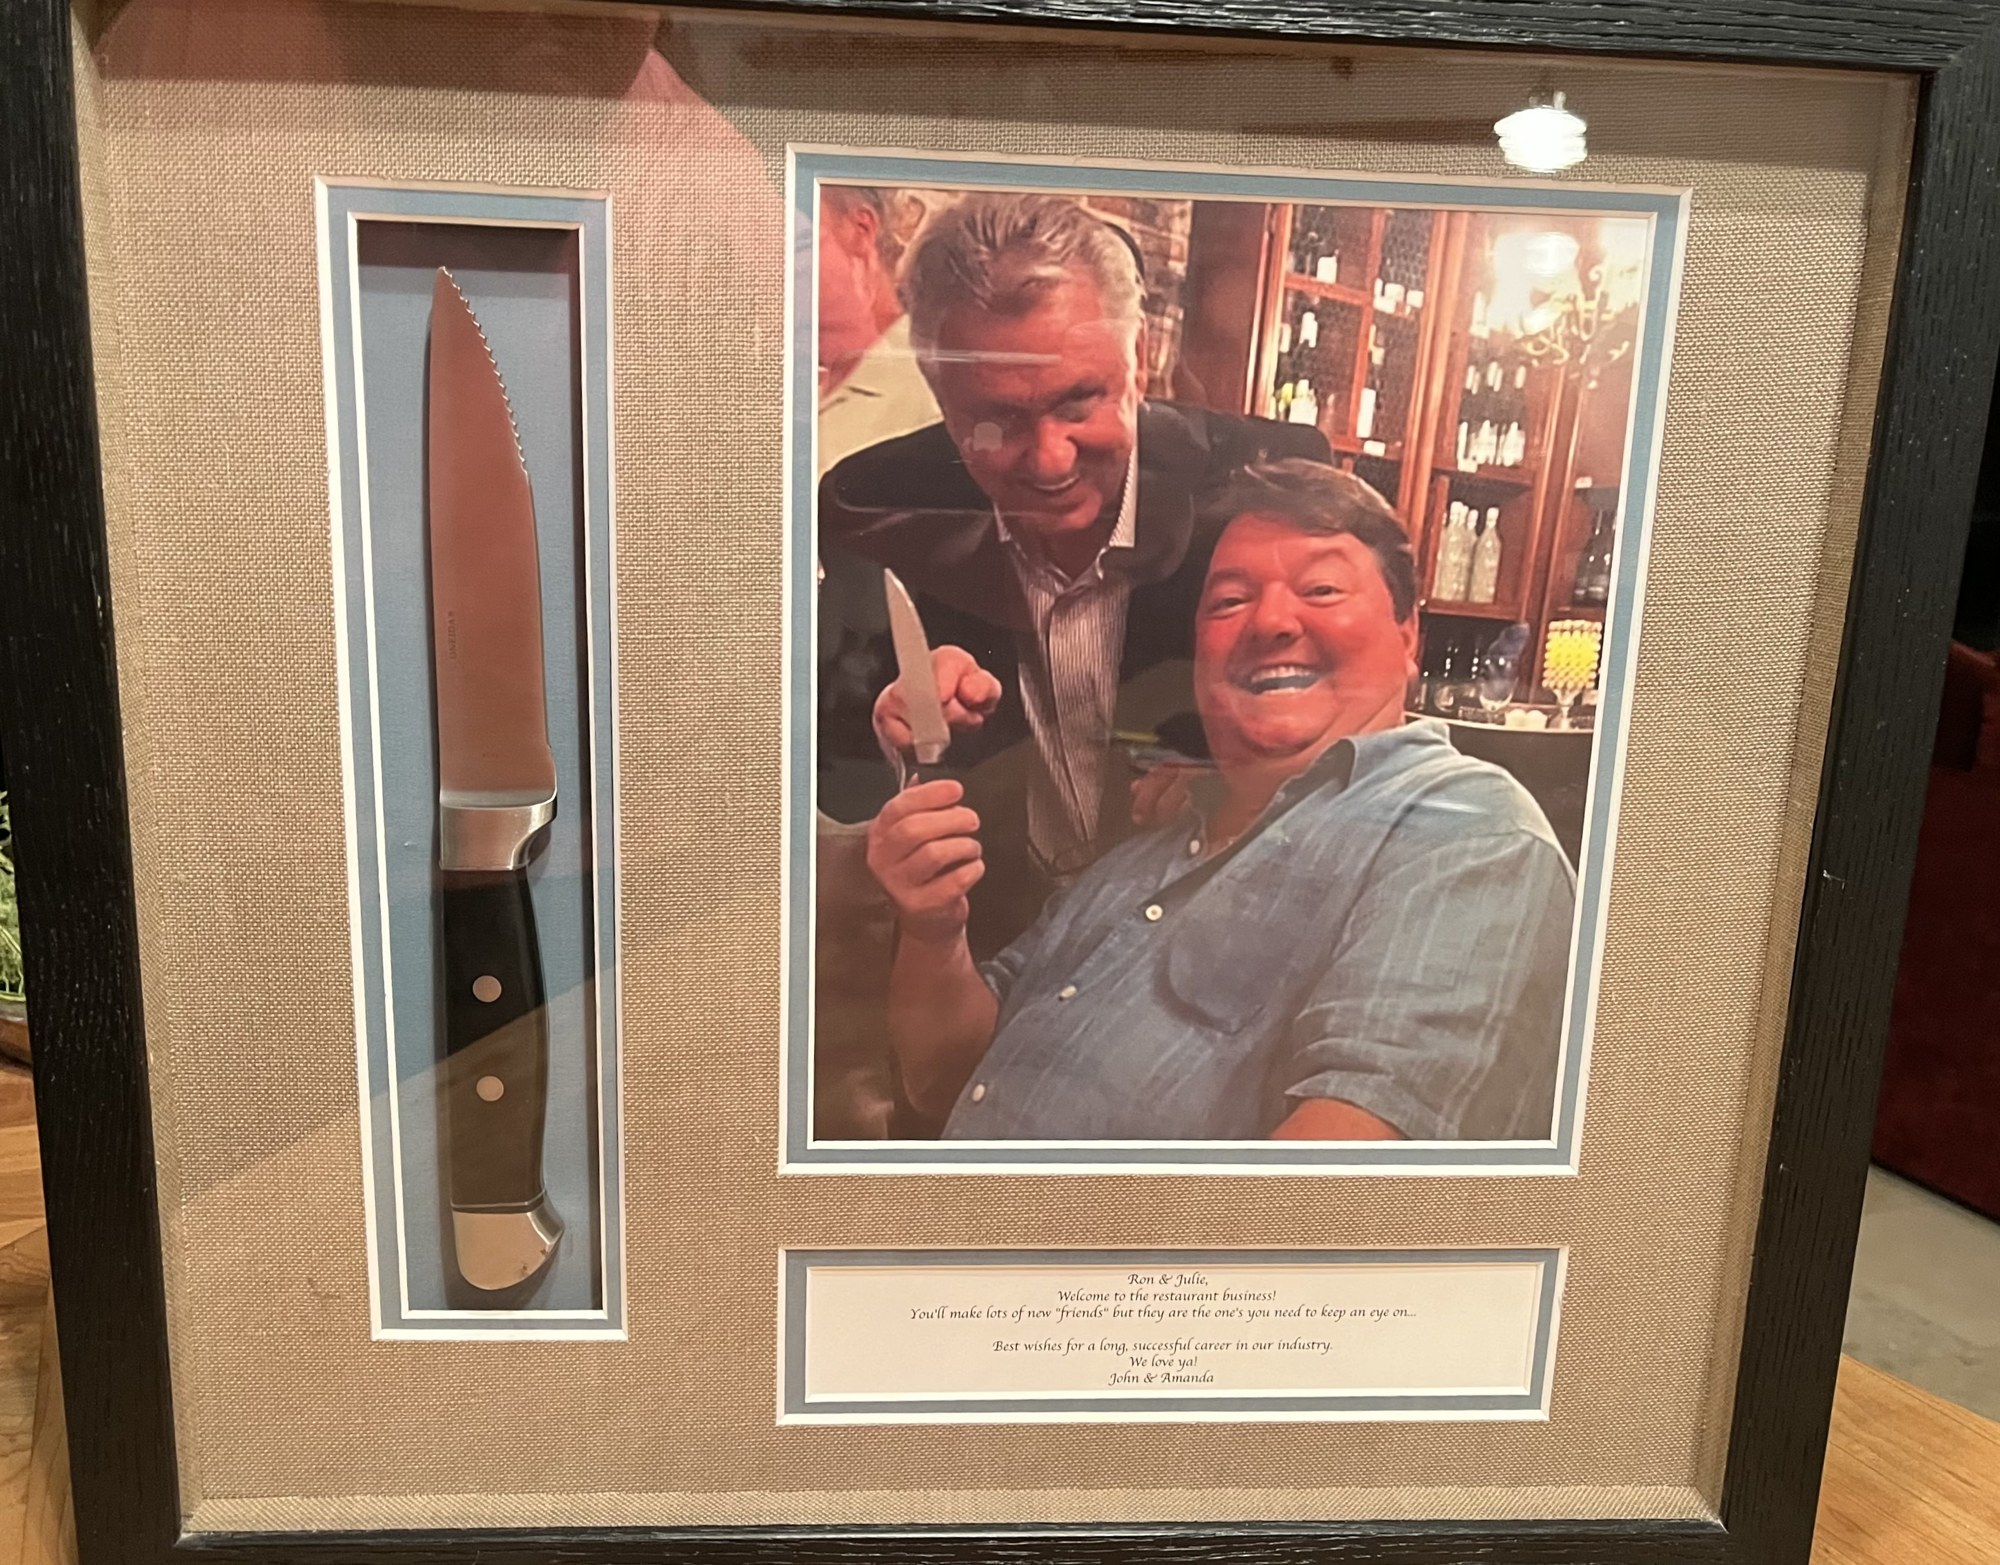 Ron Milton (left) and John Horne (right) met in 2016 when the Miltons took over ownership of Cafe L'Europe. Horne collects knives and returned this one in a shadow-box frame. Submitted